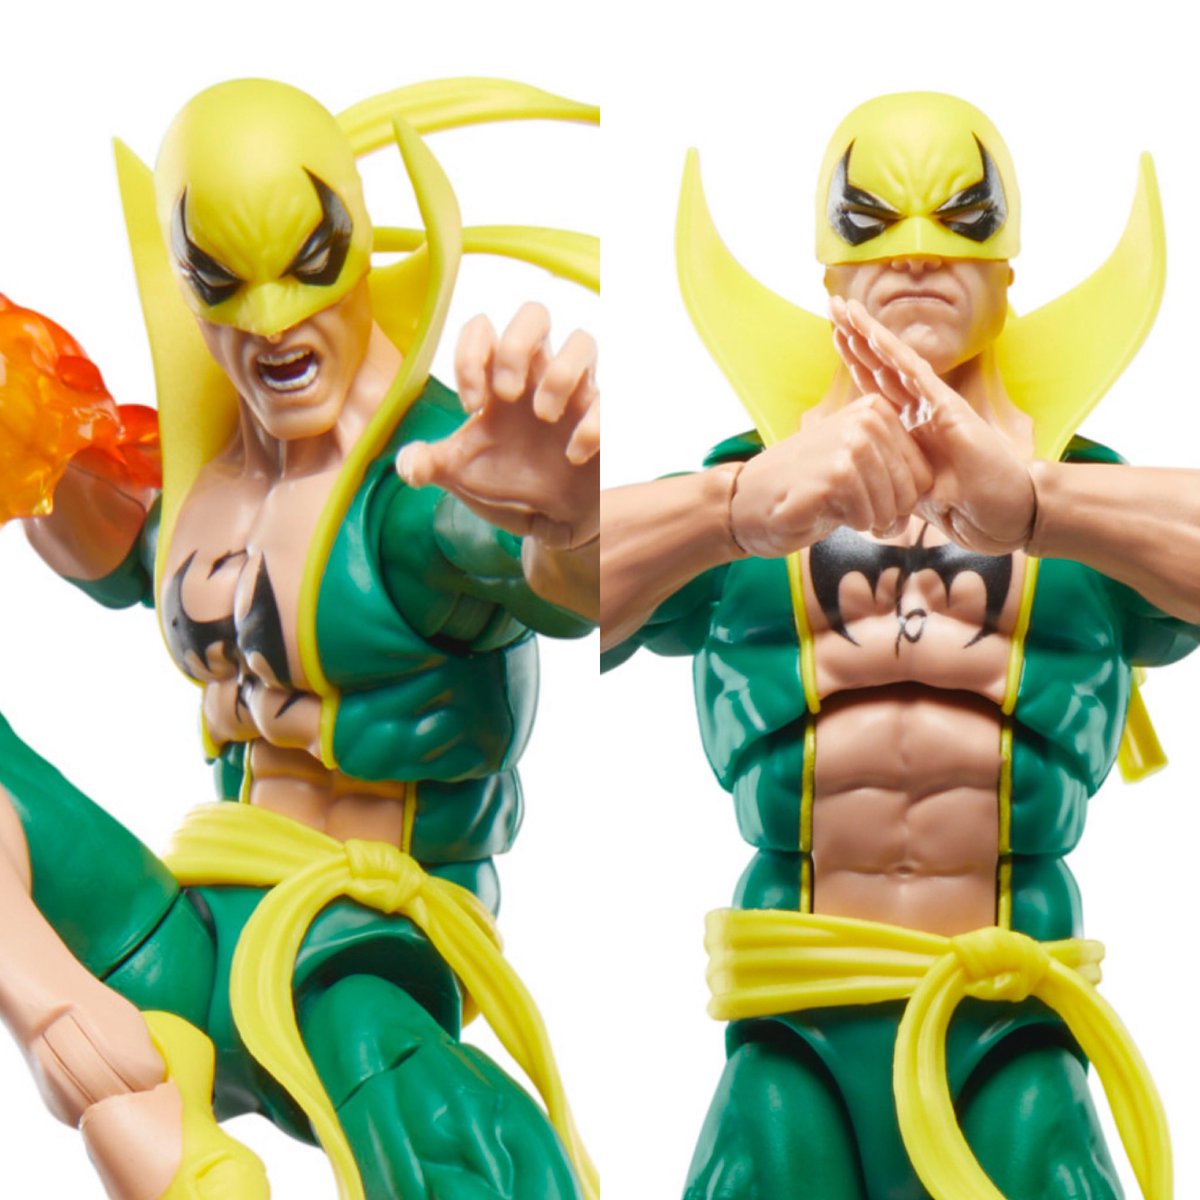 Iron Fist! New head sculpts and costume parts for the upcoming #marvellegends release.